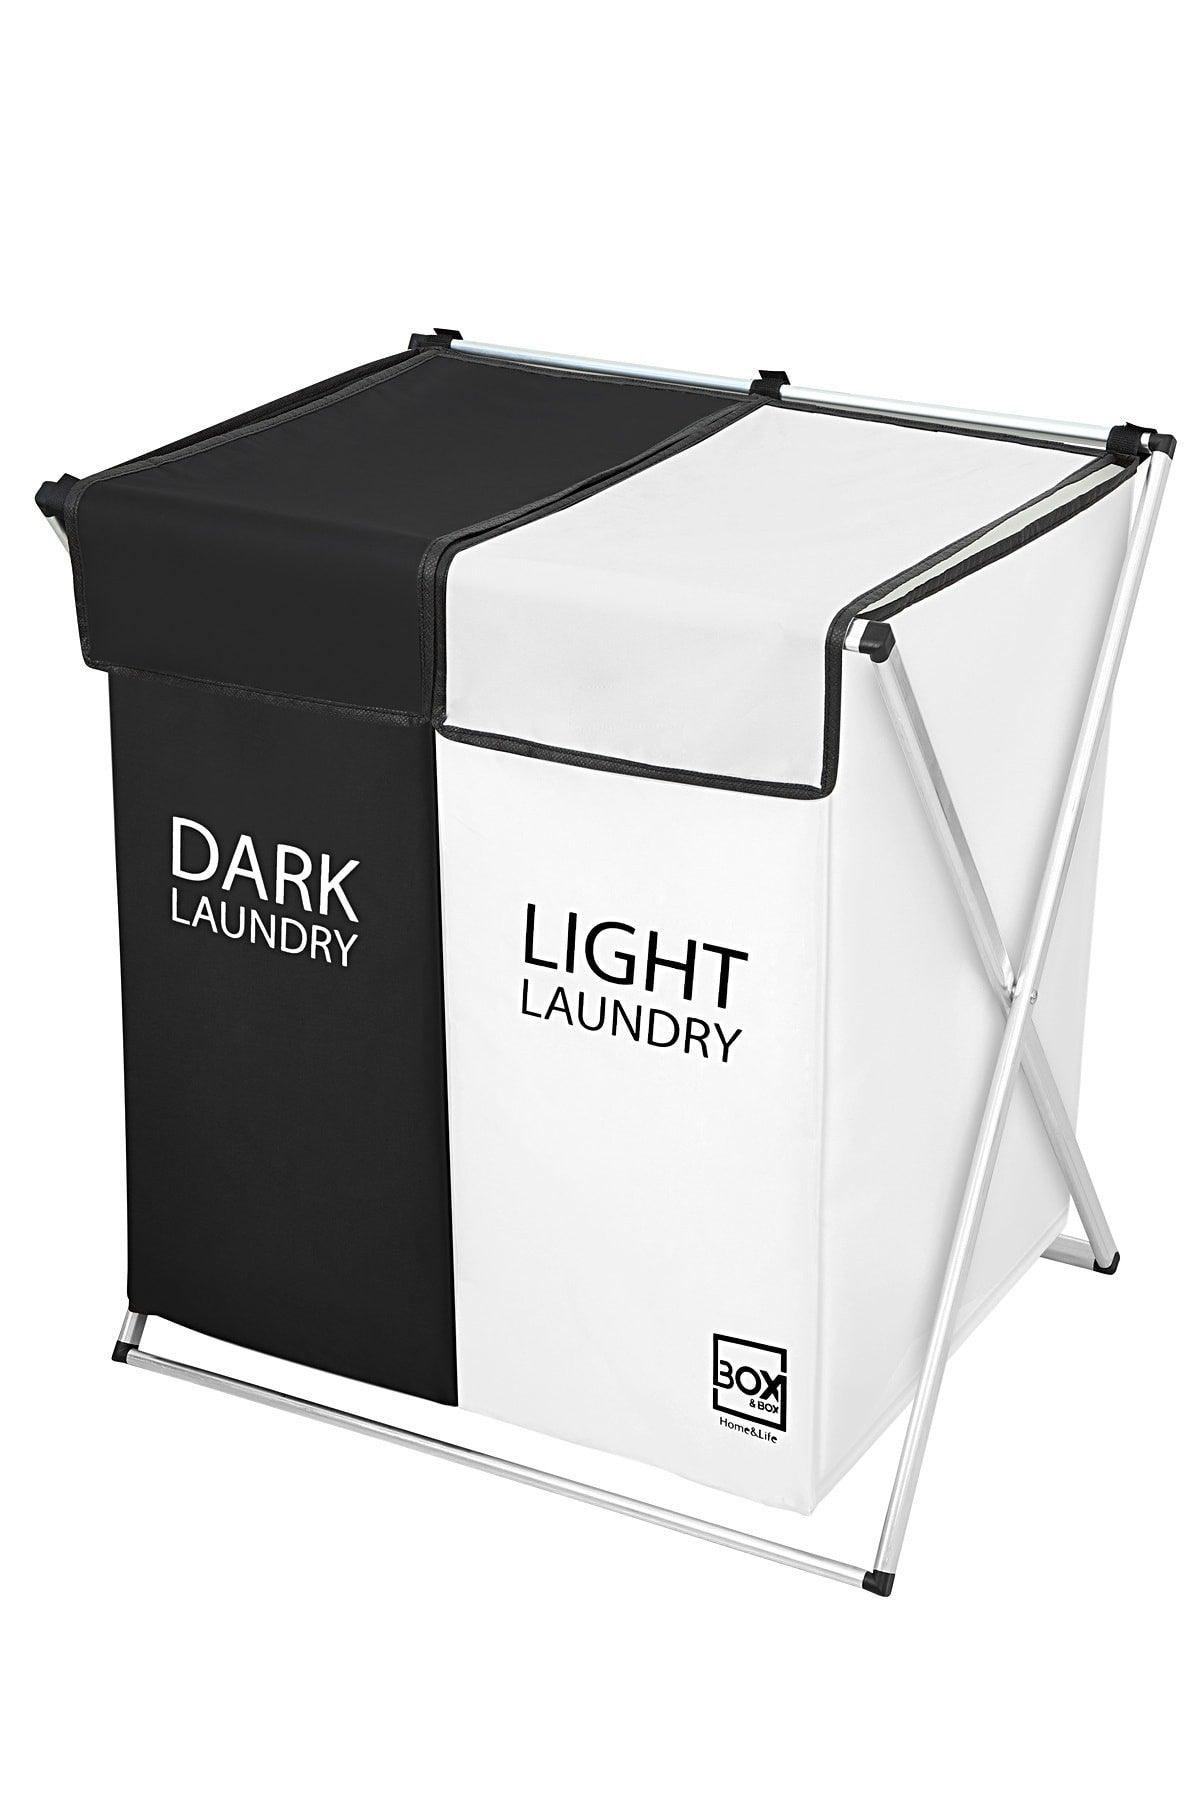 2-Compartment Laundry And Dirty Basket, Black and White, Machine Washable Fabric, 54x42x58 Cm - Swordslife